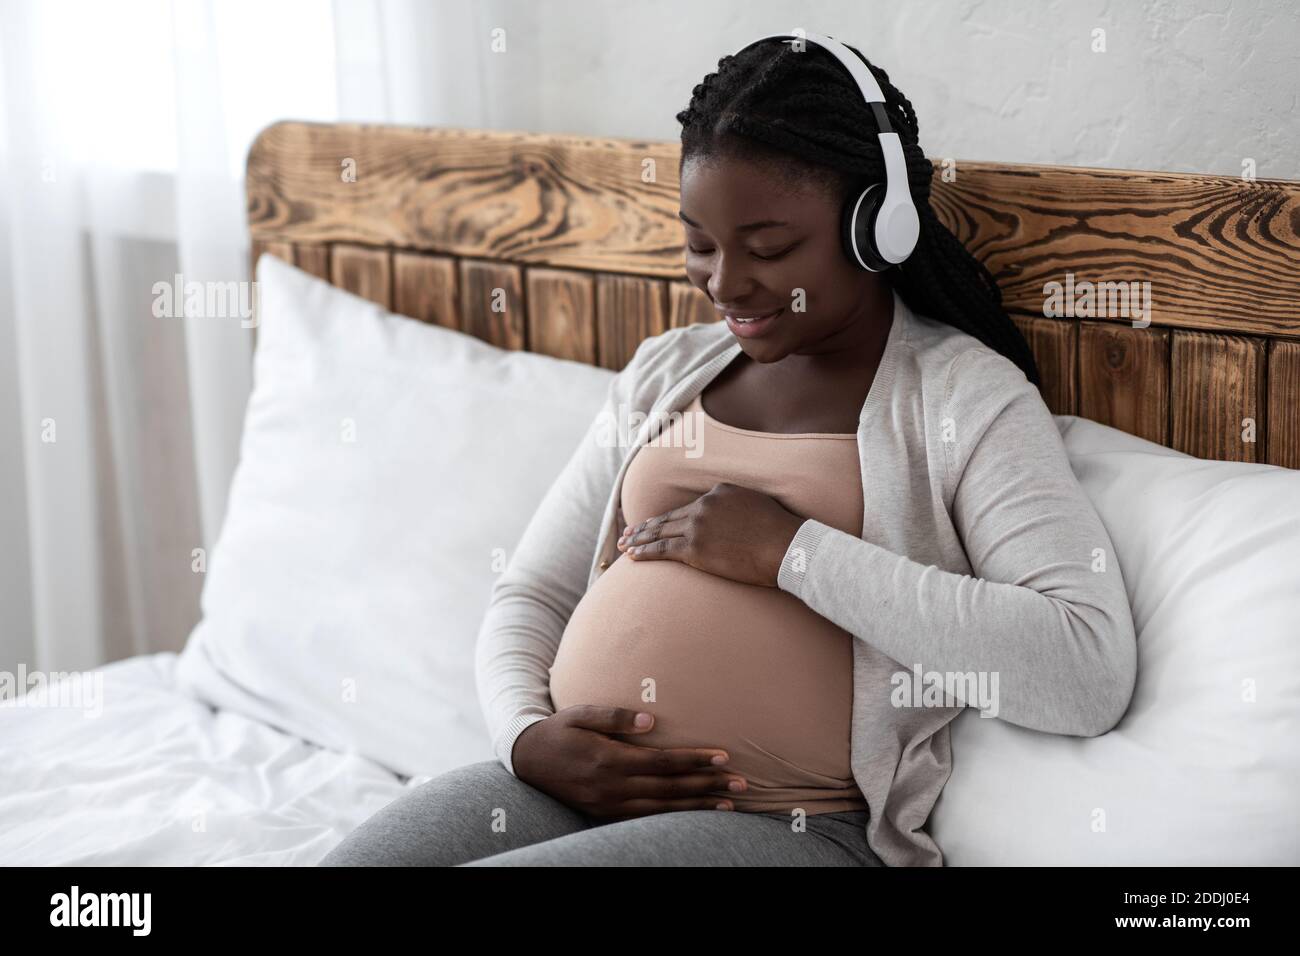 Pregnancy Music. Happy Black Pregnant Woman In Wireless Headphones Relaxing  On Bed Stock Photo - Alamy